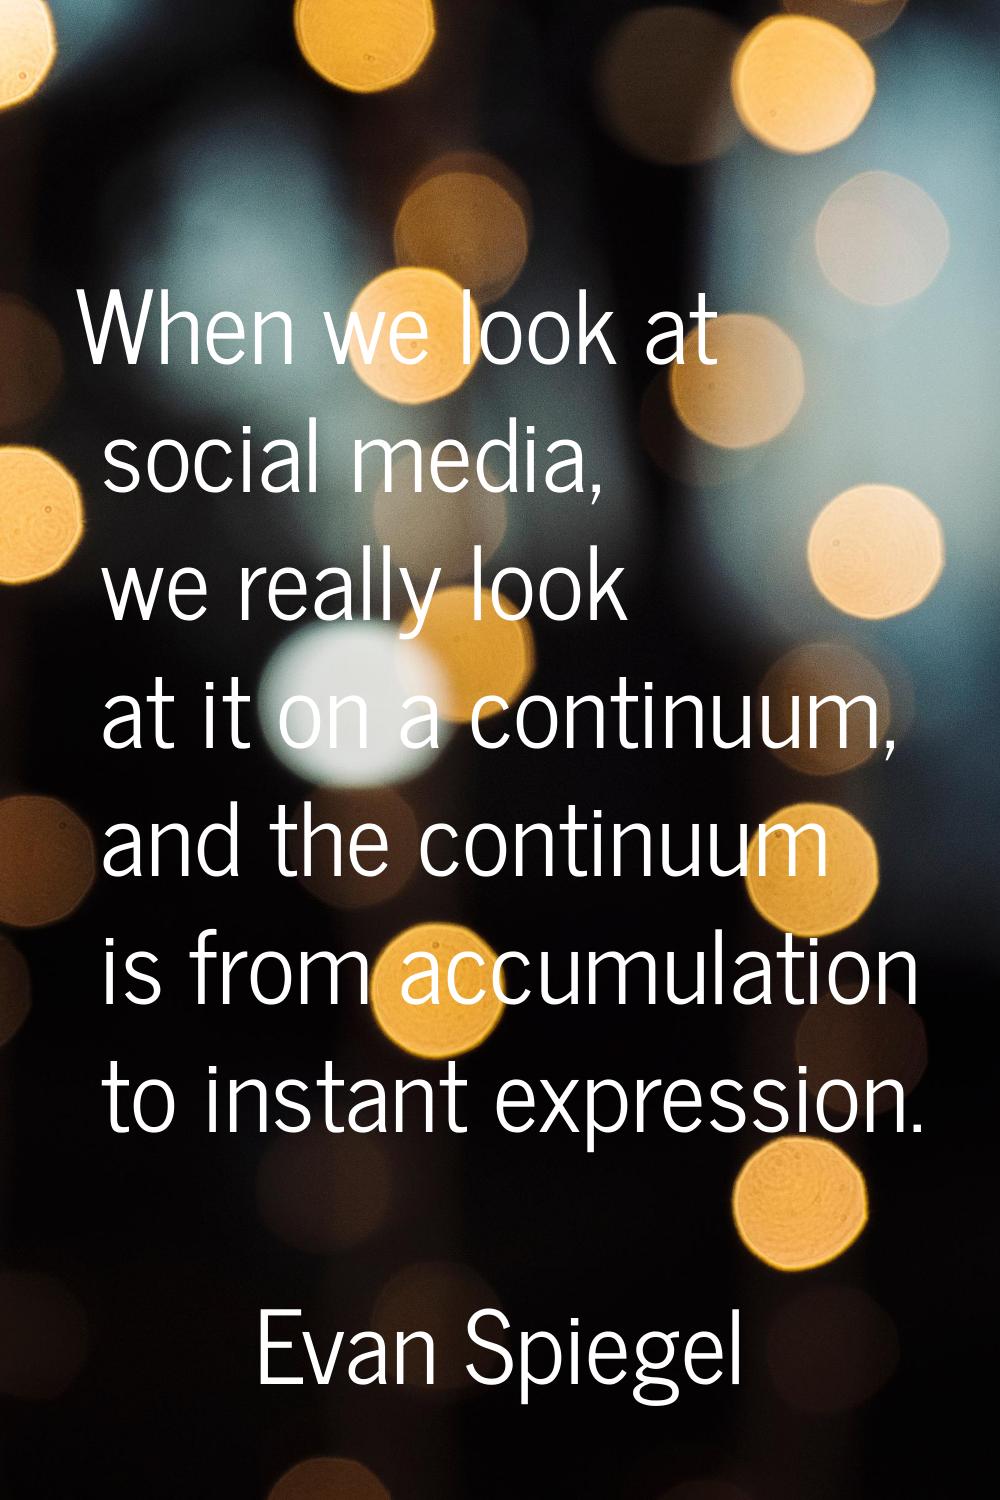 When we look at social media, we really look at it on a continuum, and the continuum is from accumu